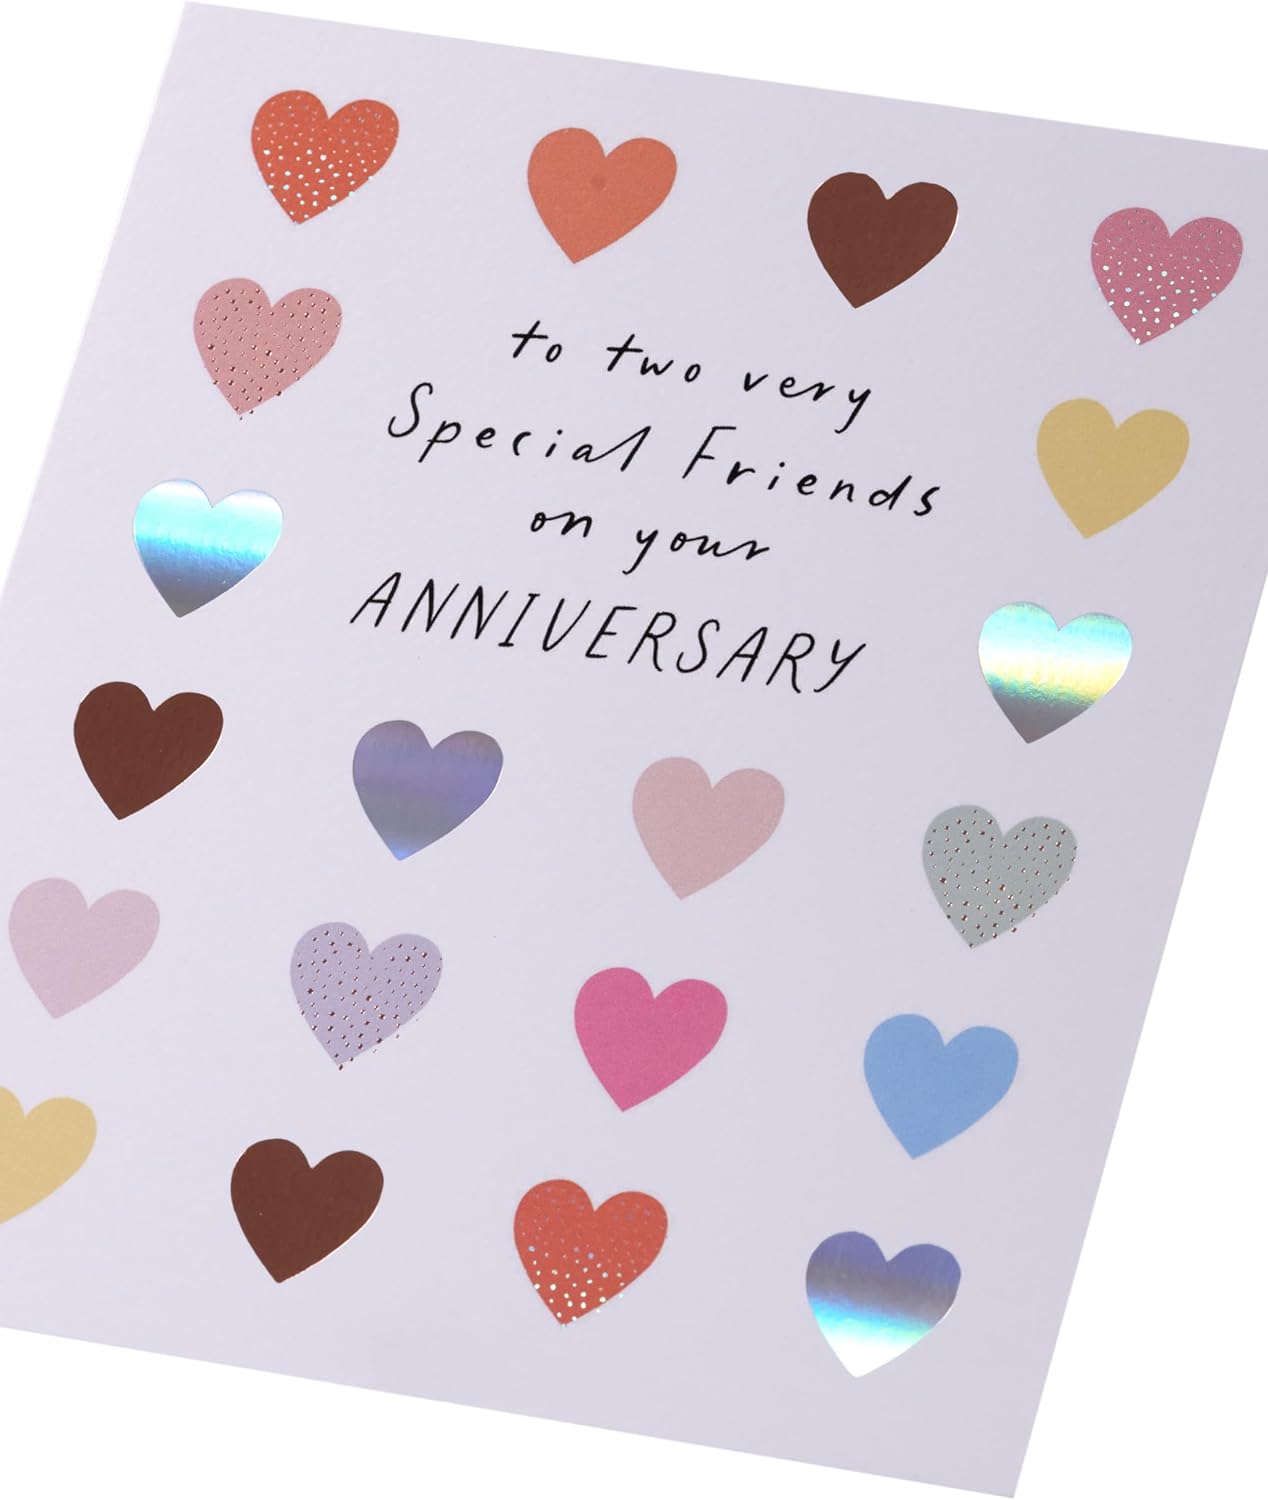 Colourful Hearts Design Anniversary Card for Special Friends